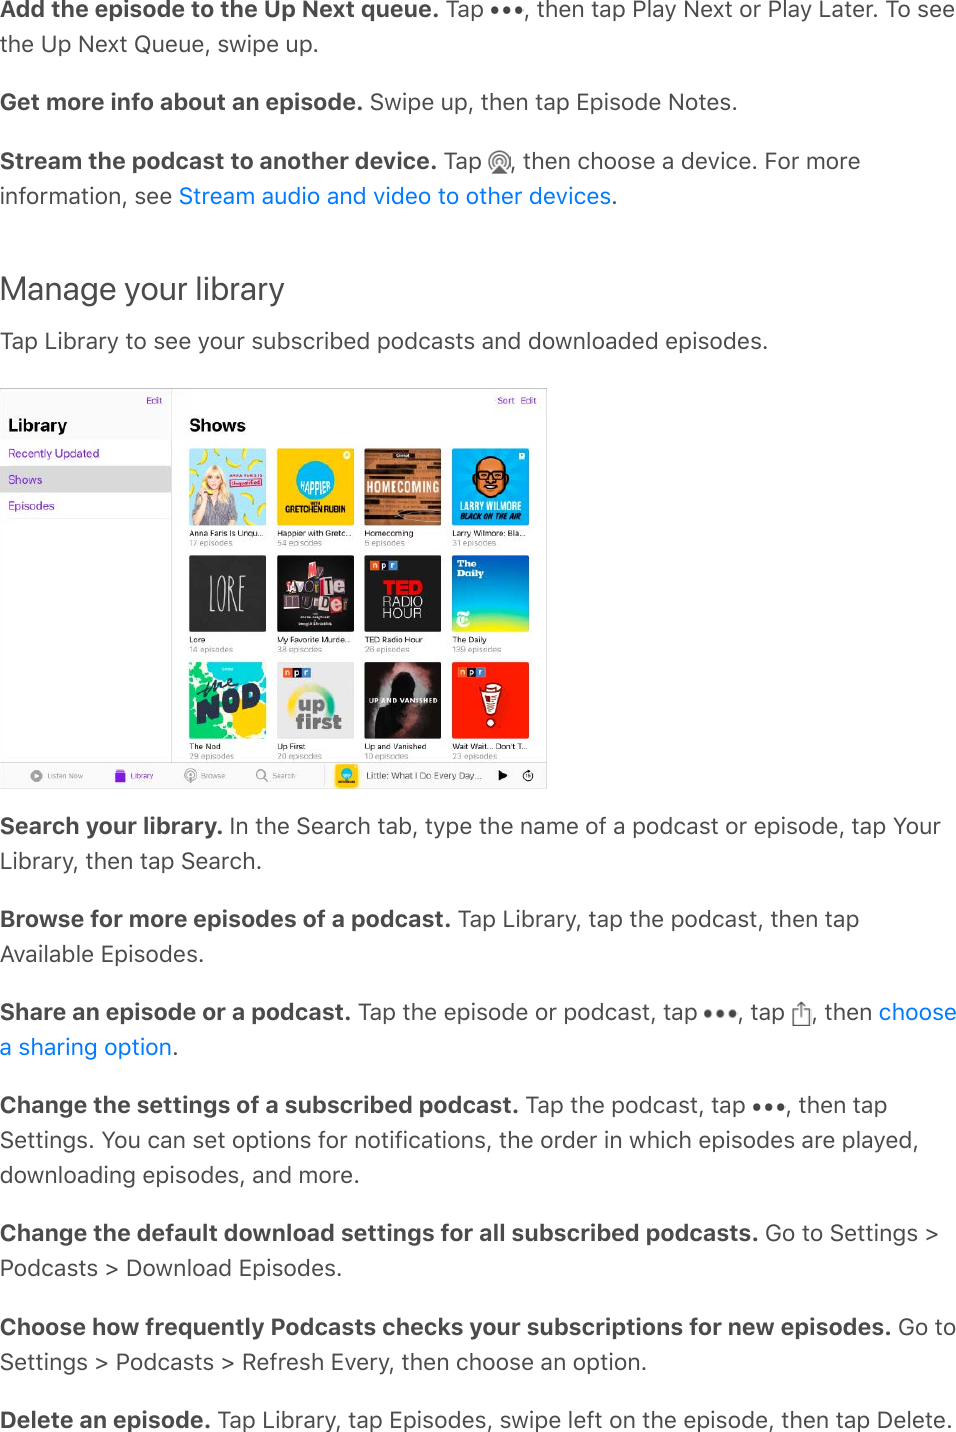 Add the episode to the Up Next queue. Tap  , then tap Play Next or Play Later. To seethe Up Next Queue, swipe up.Get more info about an episode. Swipe up, then tap Episode Notes.Stream the podcast to another device. Tap  , then choose a device. For moreinformation, see  .Manage your libraryTap Library to see your subscribed podcasts and downloaded episodes.Search your library. In the Search tab, type the name of a podcast or episode, tap YourLibrary, then tap Search.Browse for more episodes of a podcast. Tap Library, tap the podcast, then tapAvailable Episodes.Share an episode or a podcast. Tap the episode or podcast, tap  , tap  , then .Change the settings of a subscribed podcast. Tap the podcast, tap  , then tapSettings. You can set options for notifications, the order in which episodes are played,downloading episodes, and more.Change the default download settings for all subscribed podcasts. Go to Settings &gt;Podcasts &gt; Download Episodes.Choose how frequently Podcasts checks your subscriptions for new episodes. Go toSettings &gt; Podcasts &gt; Refresh Every, then choose an option.Delete an episode. Tap Library, tap Episodes, swipe left on the episode, then tap Delete.Stream audio and video to other deviceschoosea sharing option